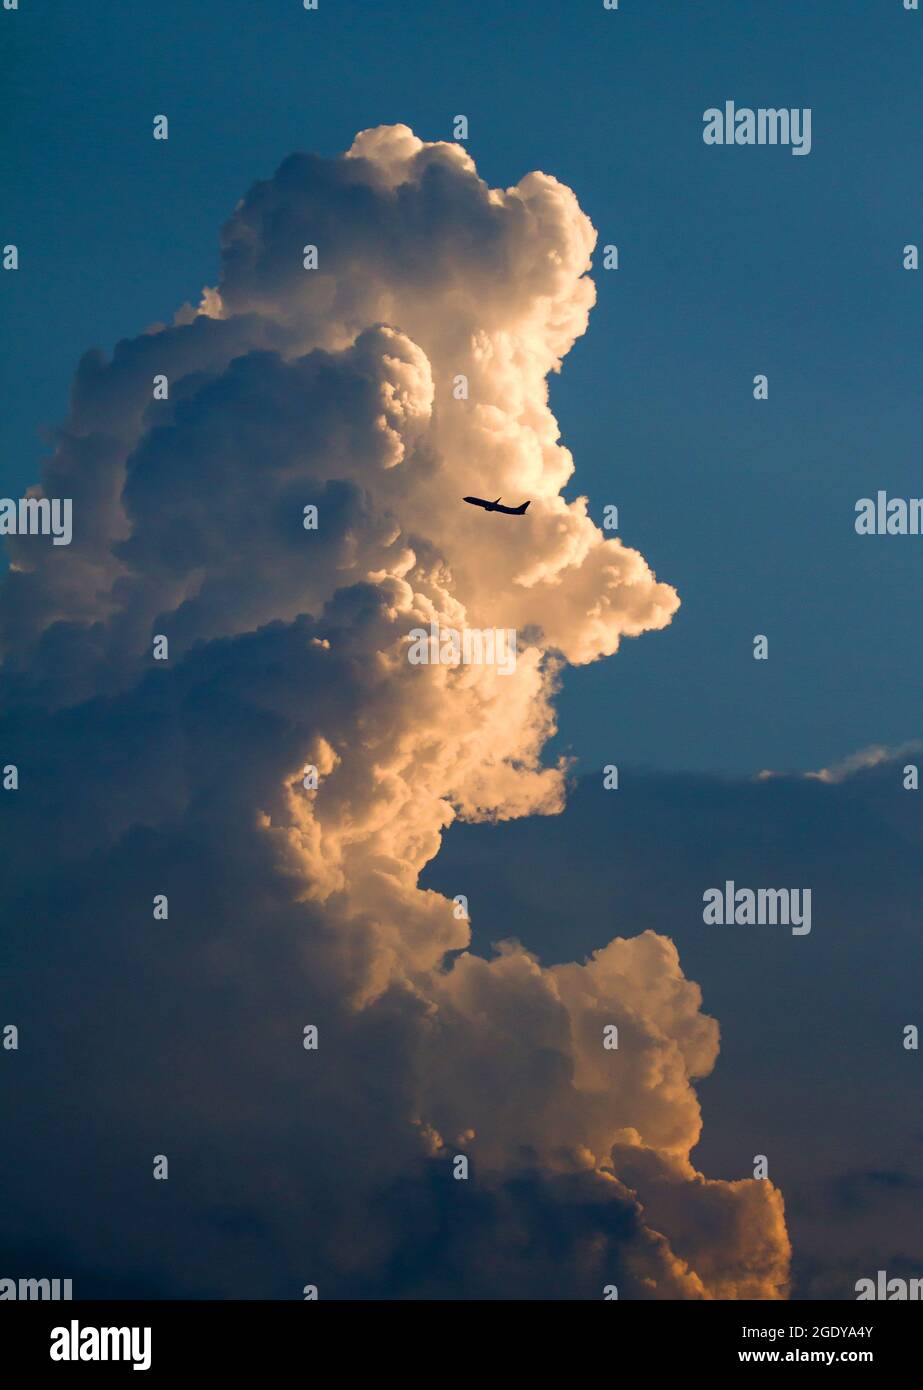 A commercial airliner passes by a large thunderhead cloud shortly after takeoff. Stock Photo